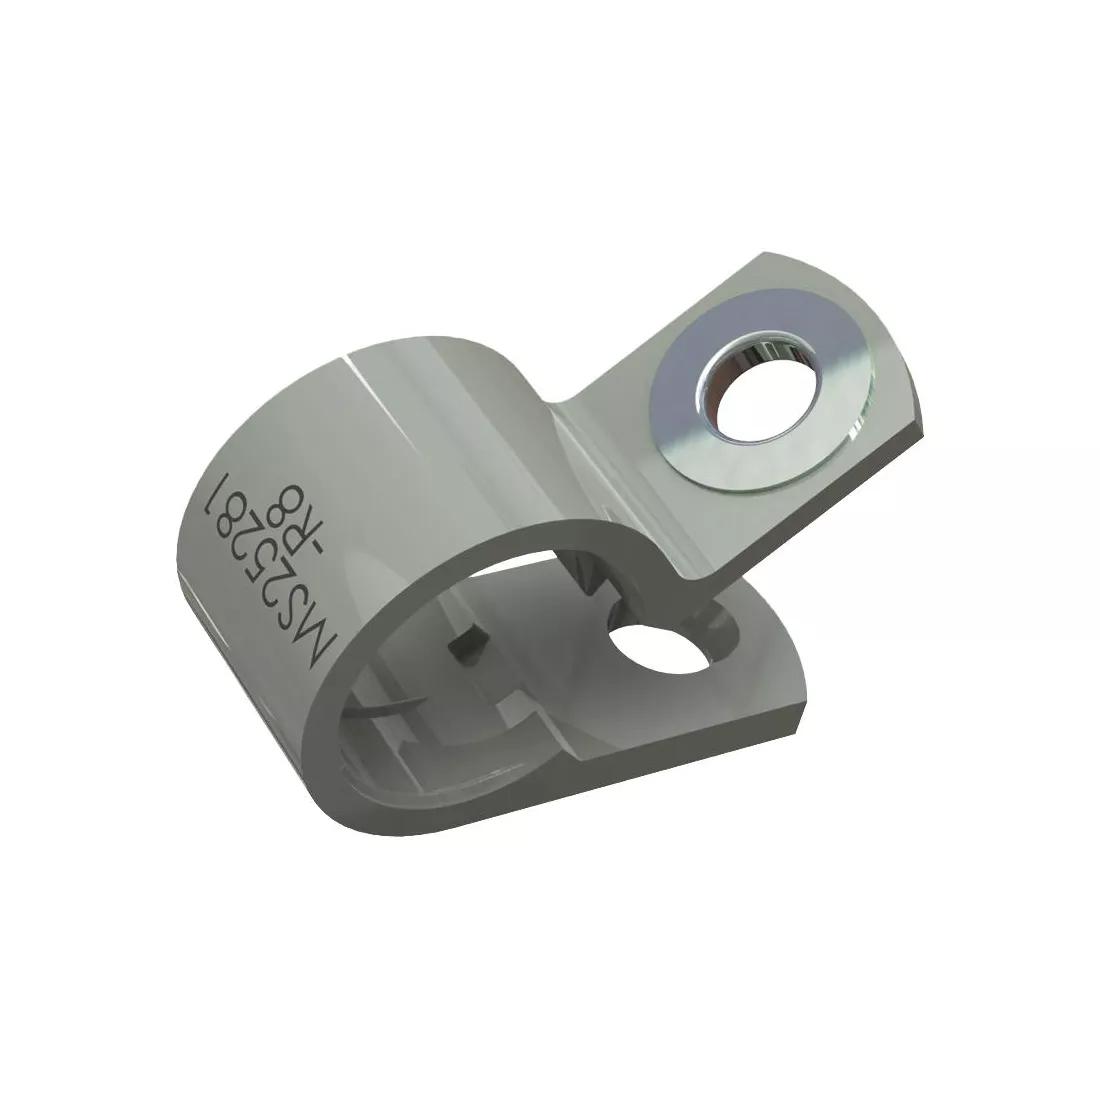 Cable Clamps - Screw Mount Type1 Grey